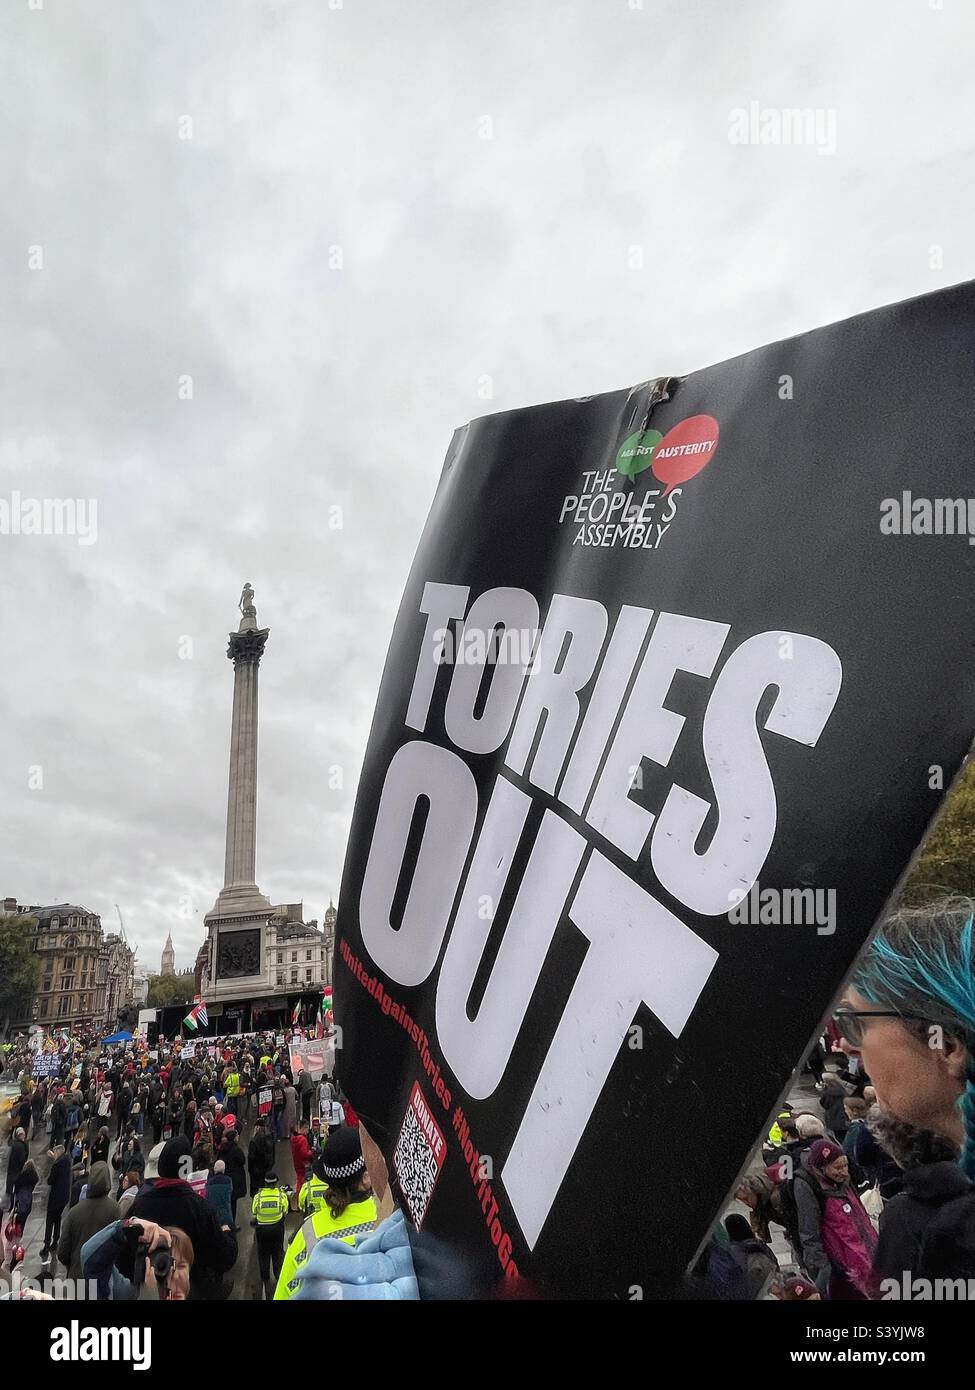 Demonstration in Trafalgar Square, banner or placard reads: ‘Tories Out’ from People’s Assembly. Nelson’s Column visible Stock Photo